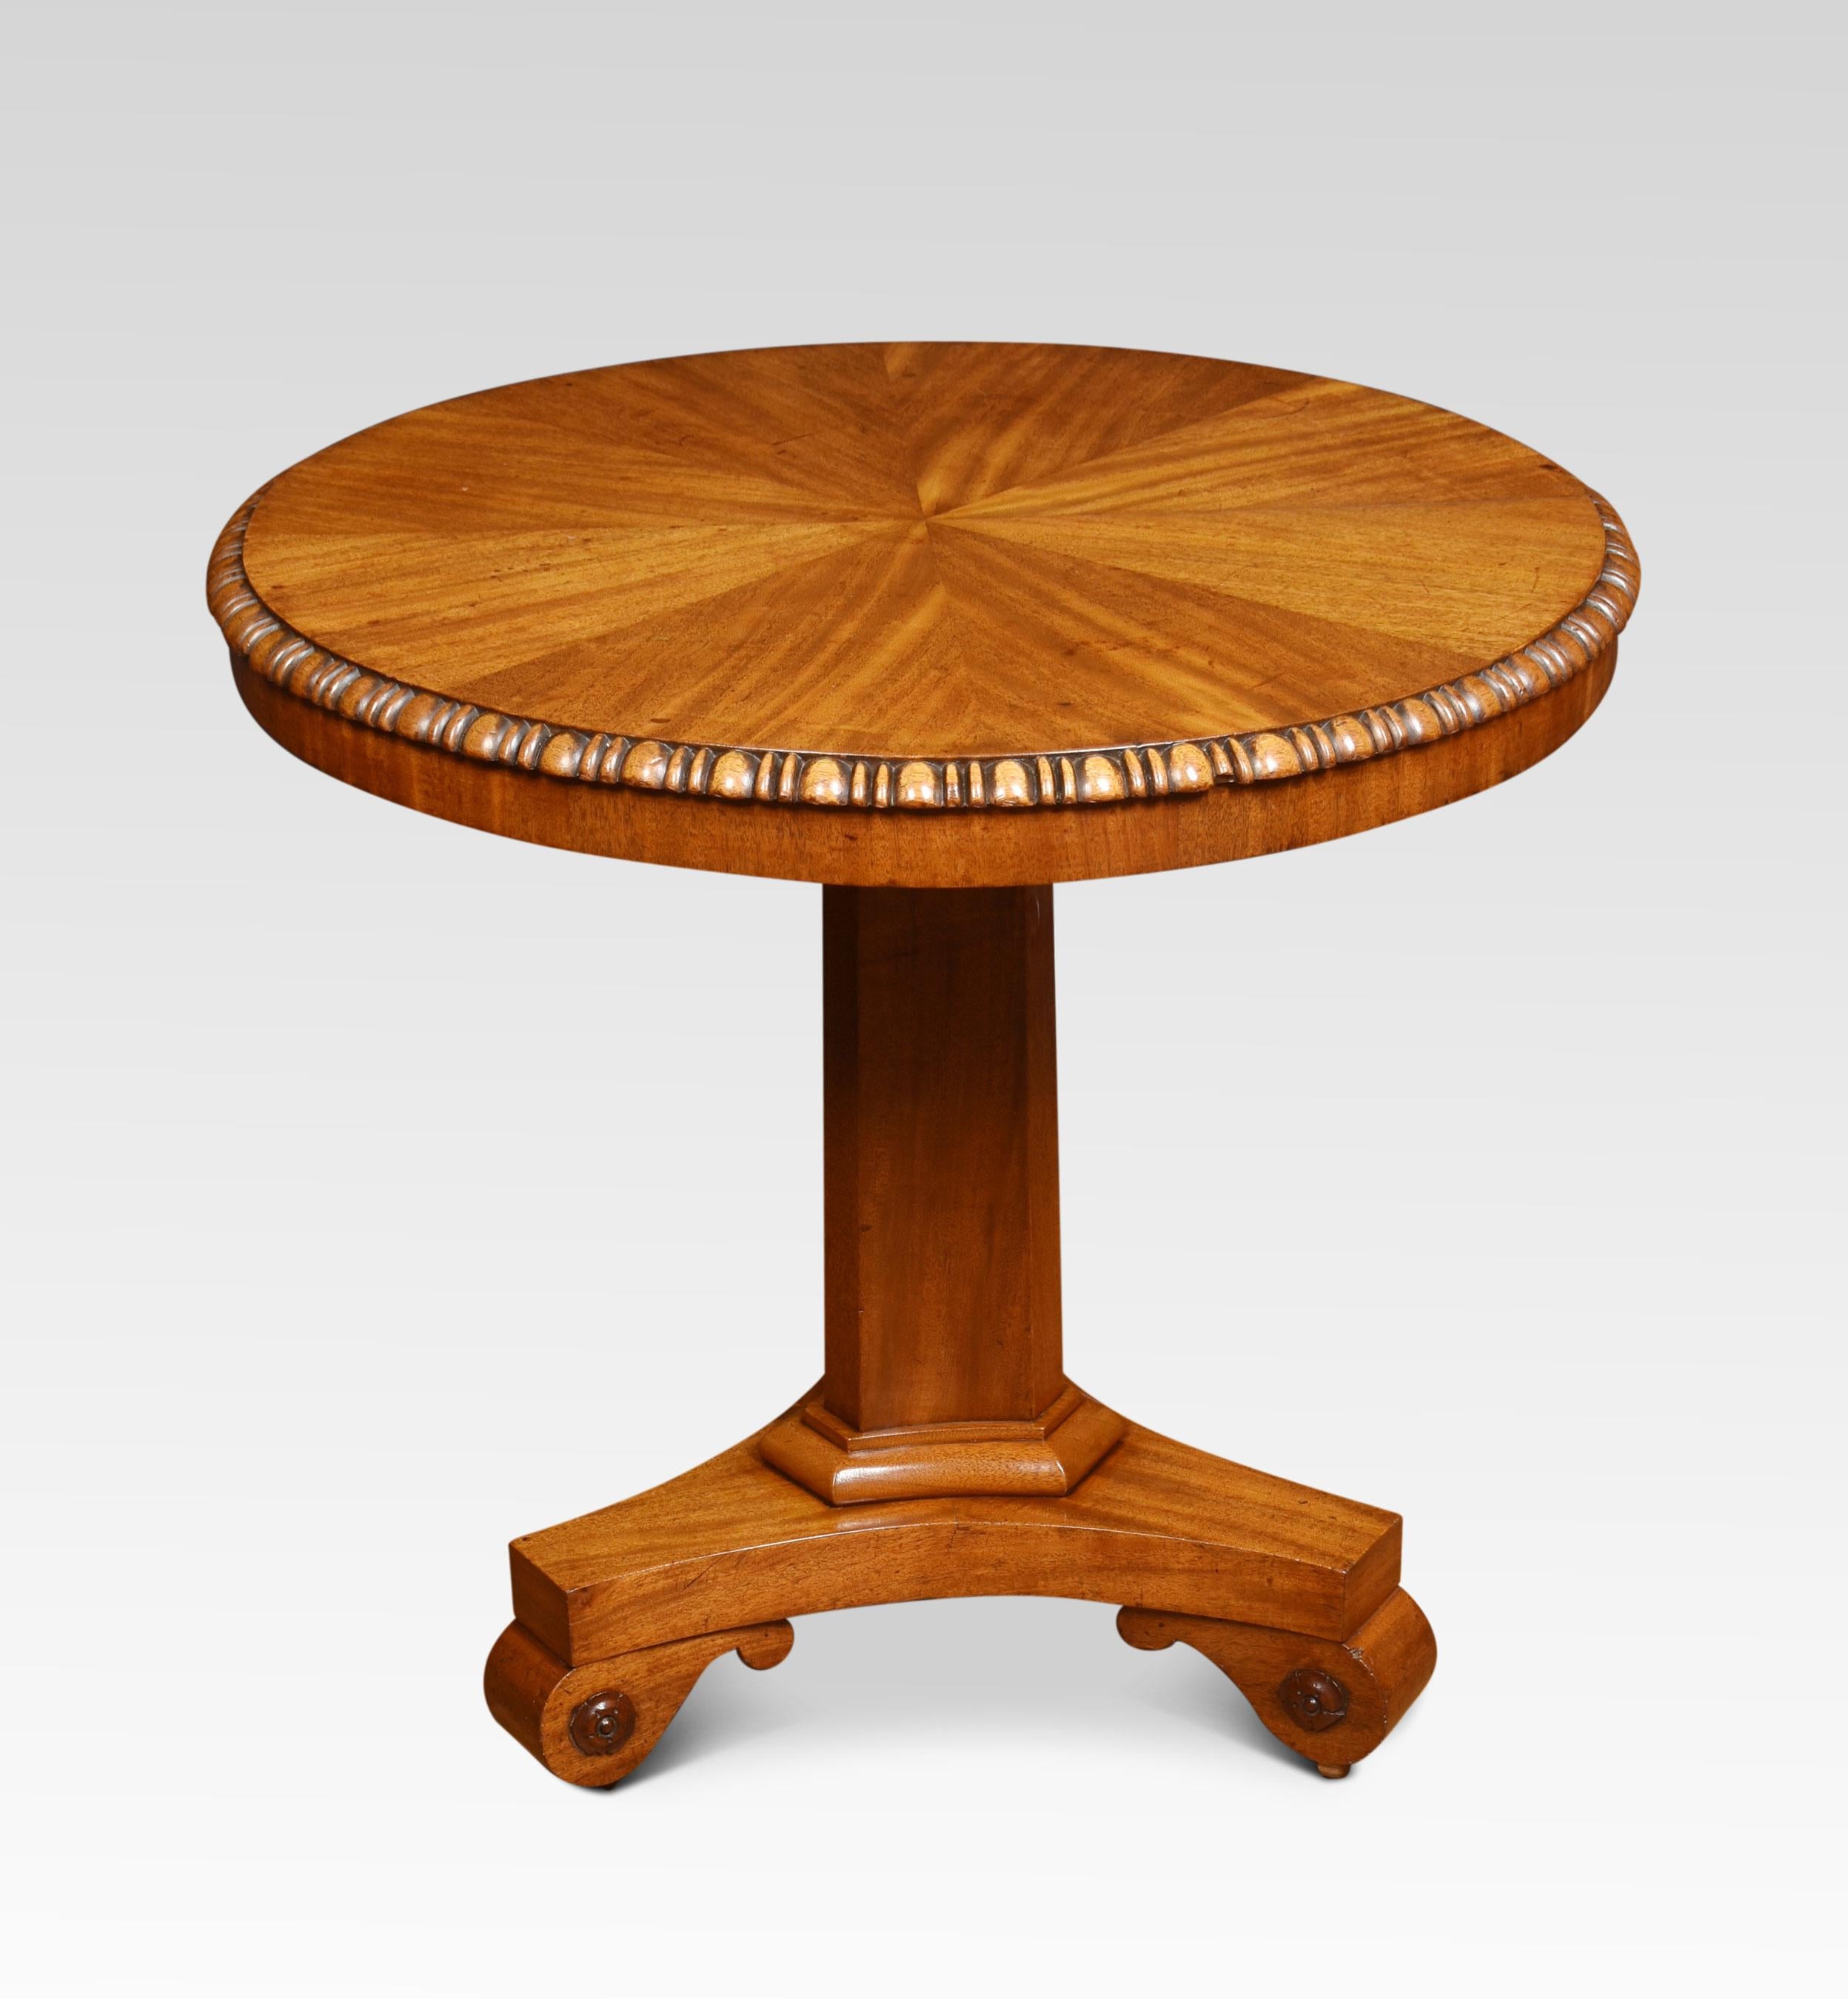 Mahogany pedestal table the well figured circular tilting top enclosed by the gadrooned border. Raised up on a concave hexagonal column. To the triangular base terminating in scroll feet and recessed castors
Dimensions
Height 29 Inches
Width 30.5